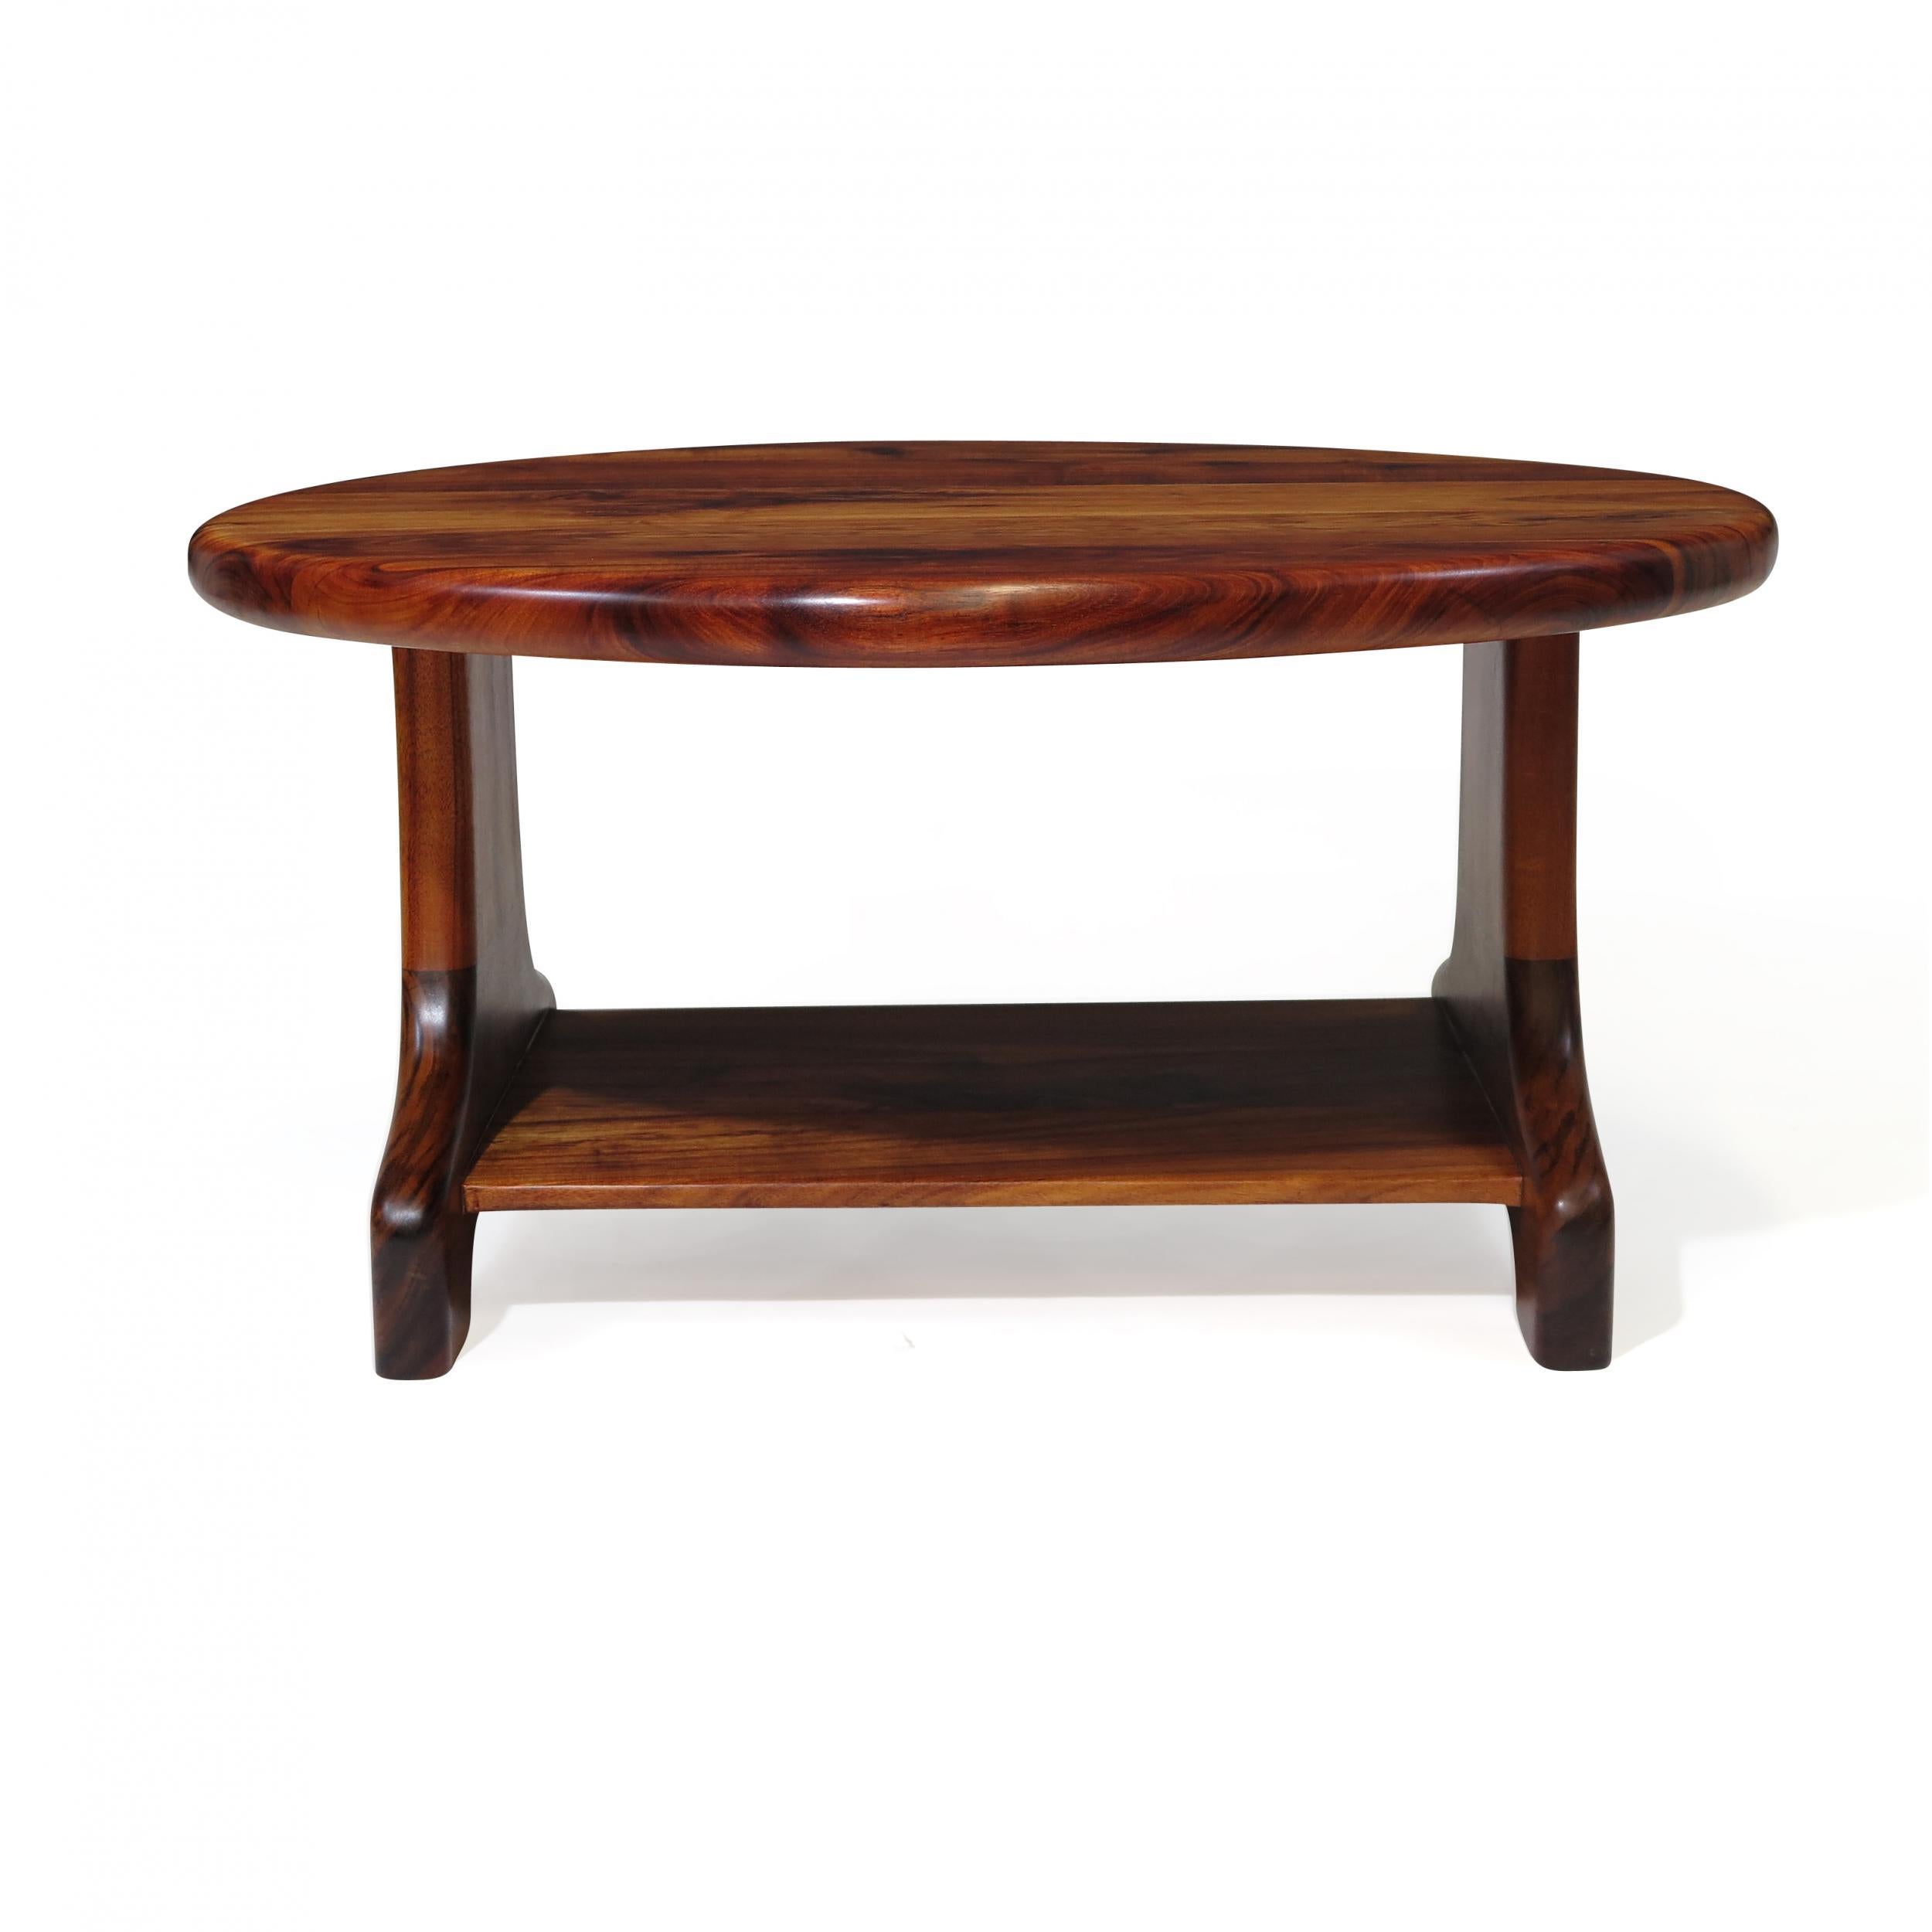 Midcentury studio crafted coffee table of solid Koa with lower shelf.
Fully restored in a natural oil to highlight the rich colors and grain of this fine wood.